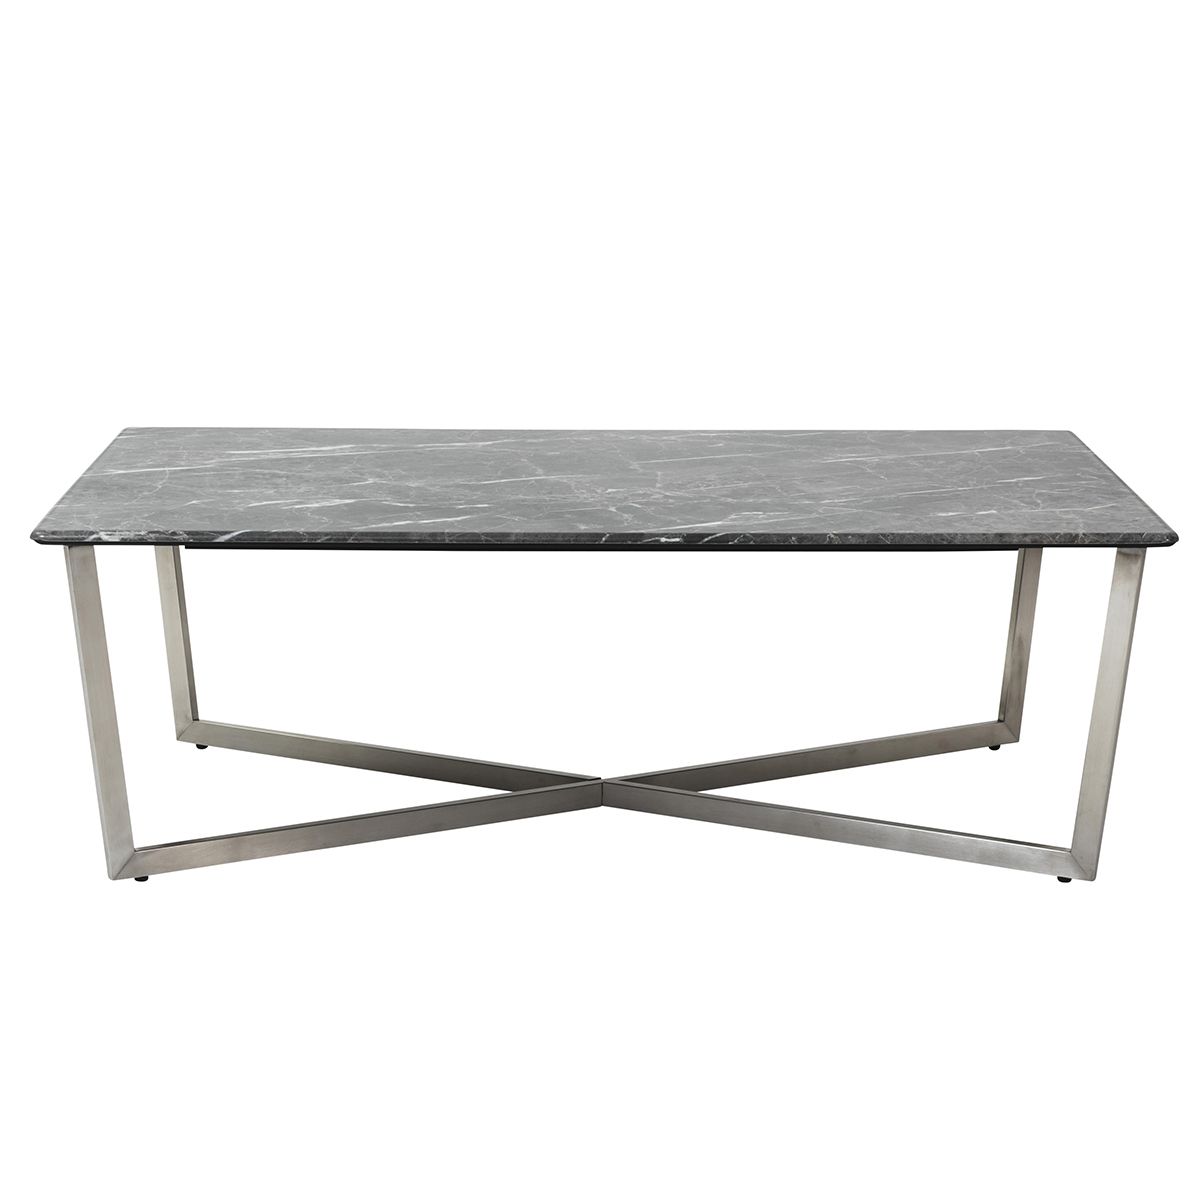 Llona 48" Rectangle Coffee Table In Black Marble Melamine With Brushed  Stainless Steel Base In Grayeuro Style Throughout Marble Melamine Coffee Tables (View 11 of 20)